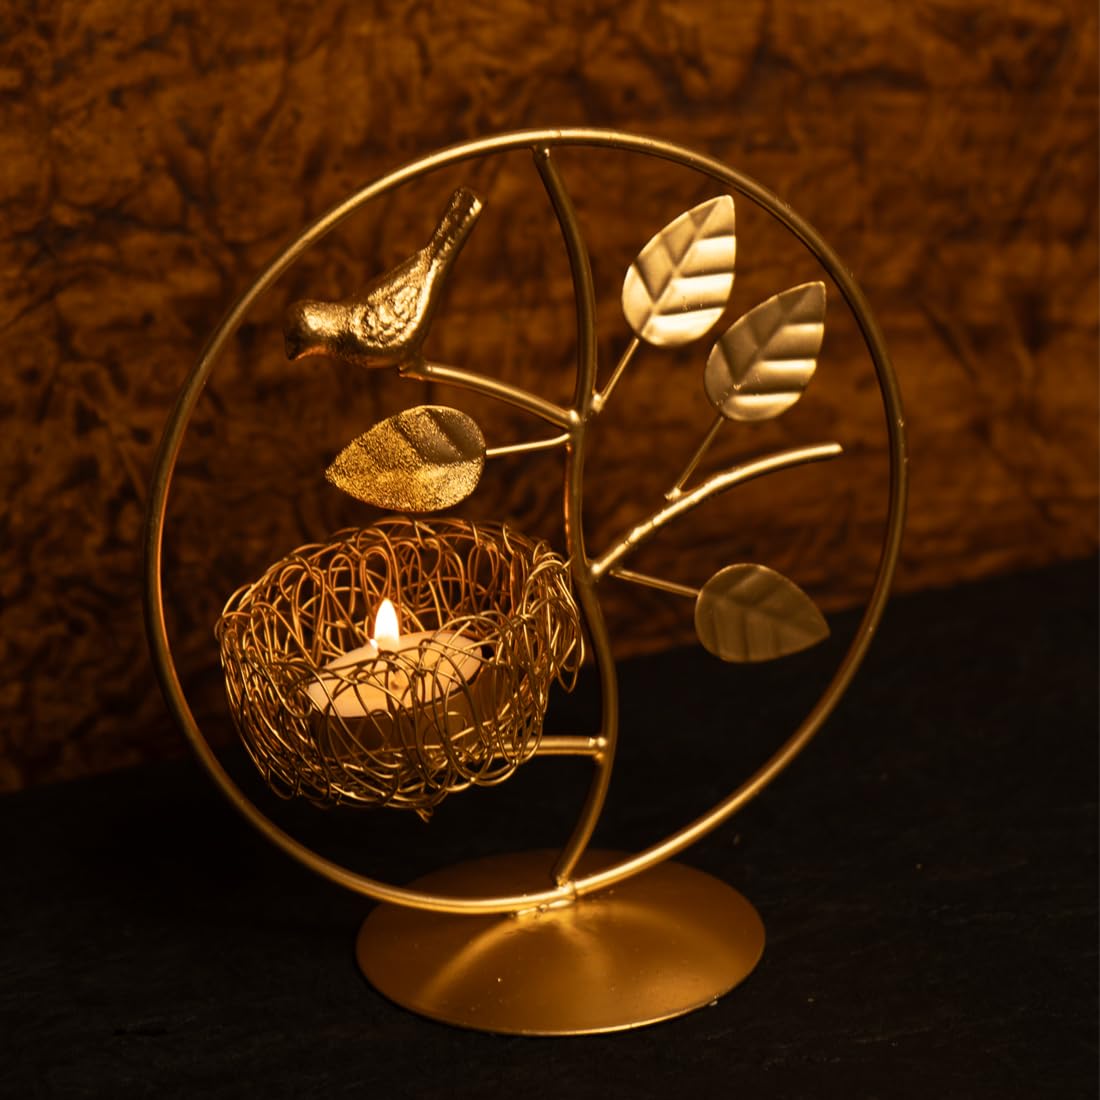 Ekhasa Metal Tealight Candle Holder for Home Decor|Perfect Candle Stand for Diwali Decoration and Table Decor|Indoor & Outdoor, Festival Decorative Candles Gift Items (Bird Nest Tealight), Gold